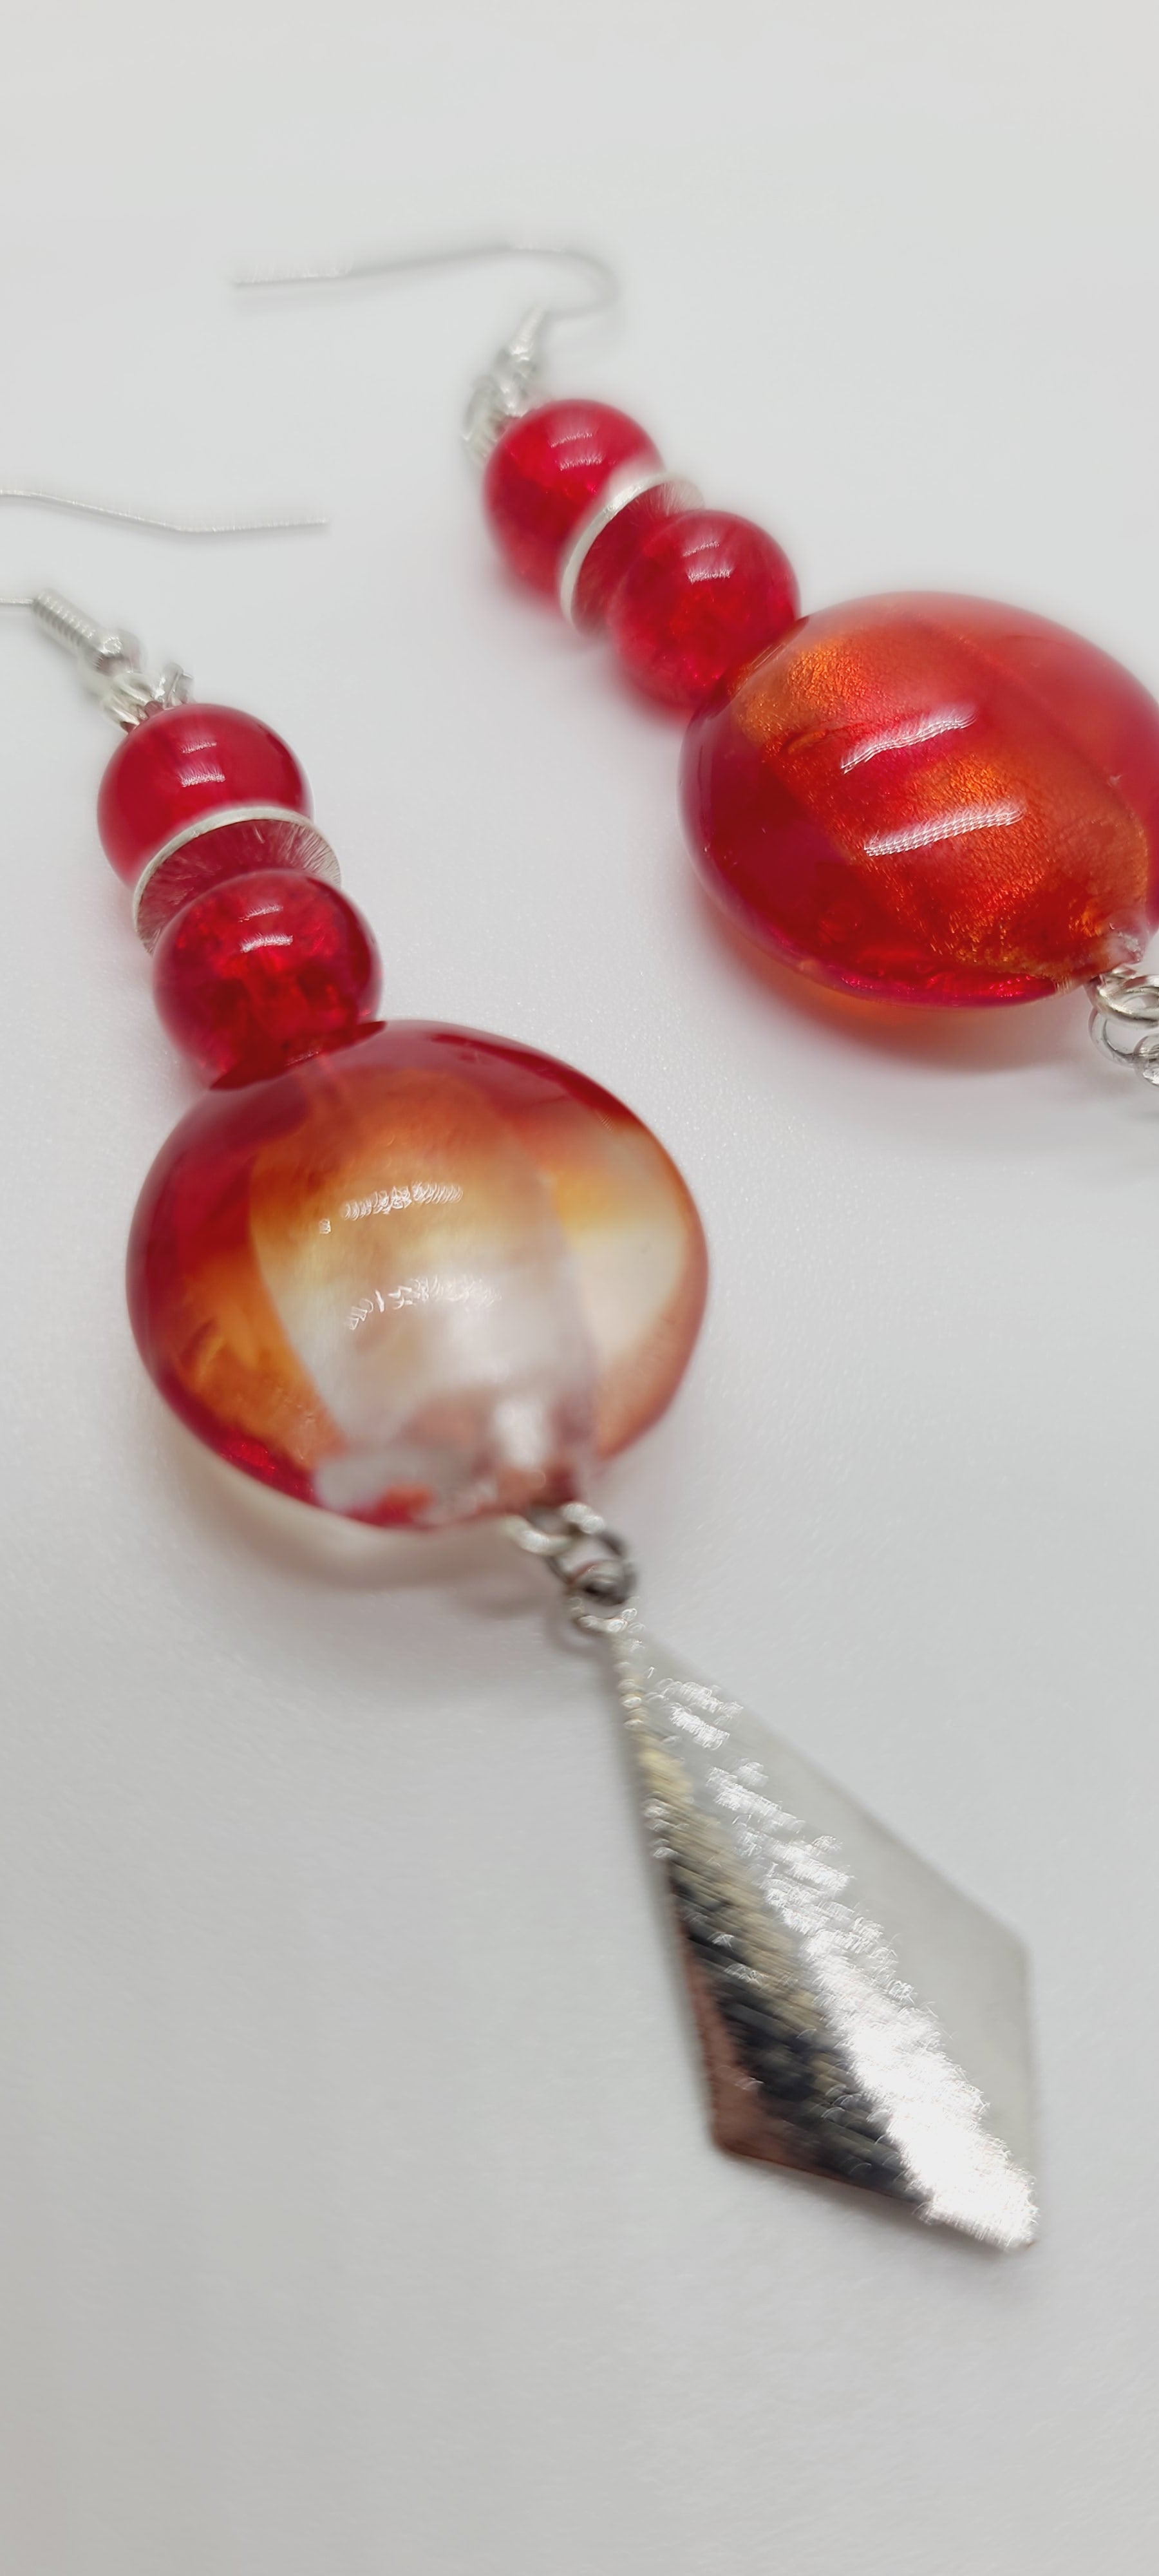 Length: 3 inches | Weight: 0.6 ounces  Distinctly You! These earrings are made with red and silver swirl Italian Murano glass stones, 8mm red glass beads, accented with silver rondelles and charms.